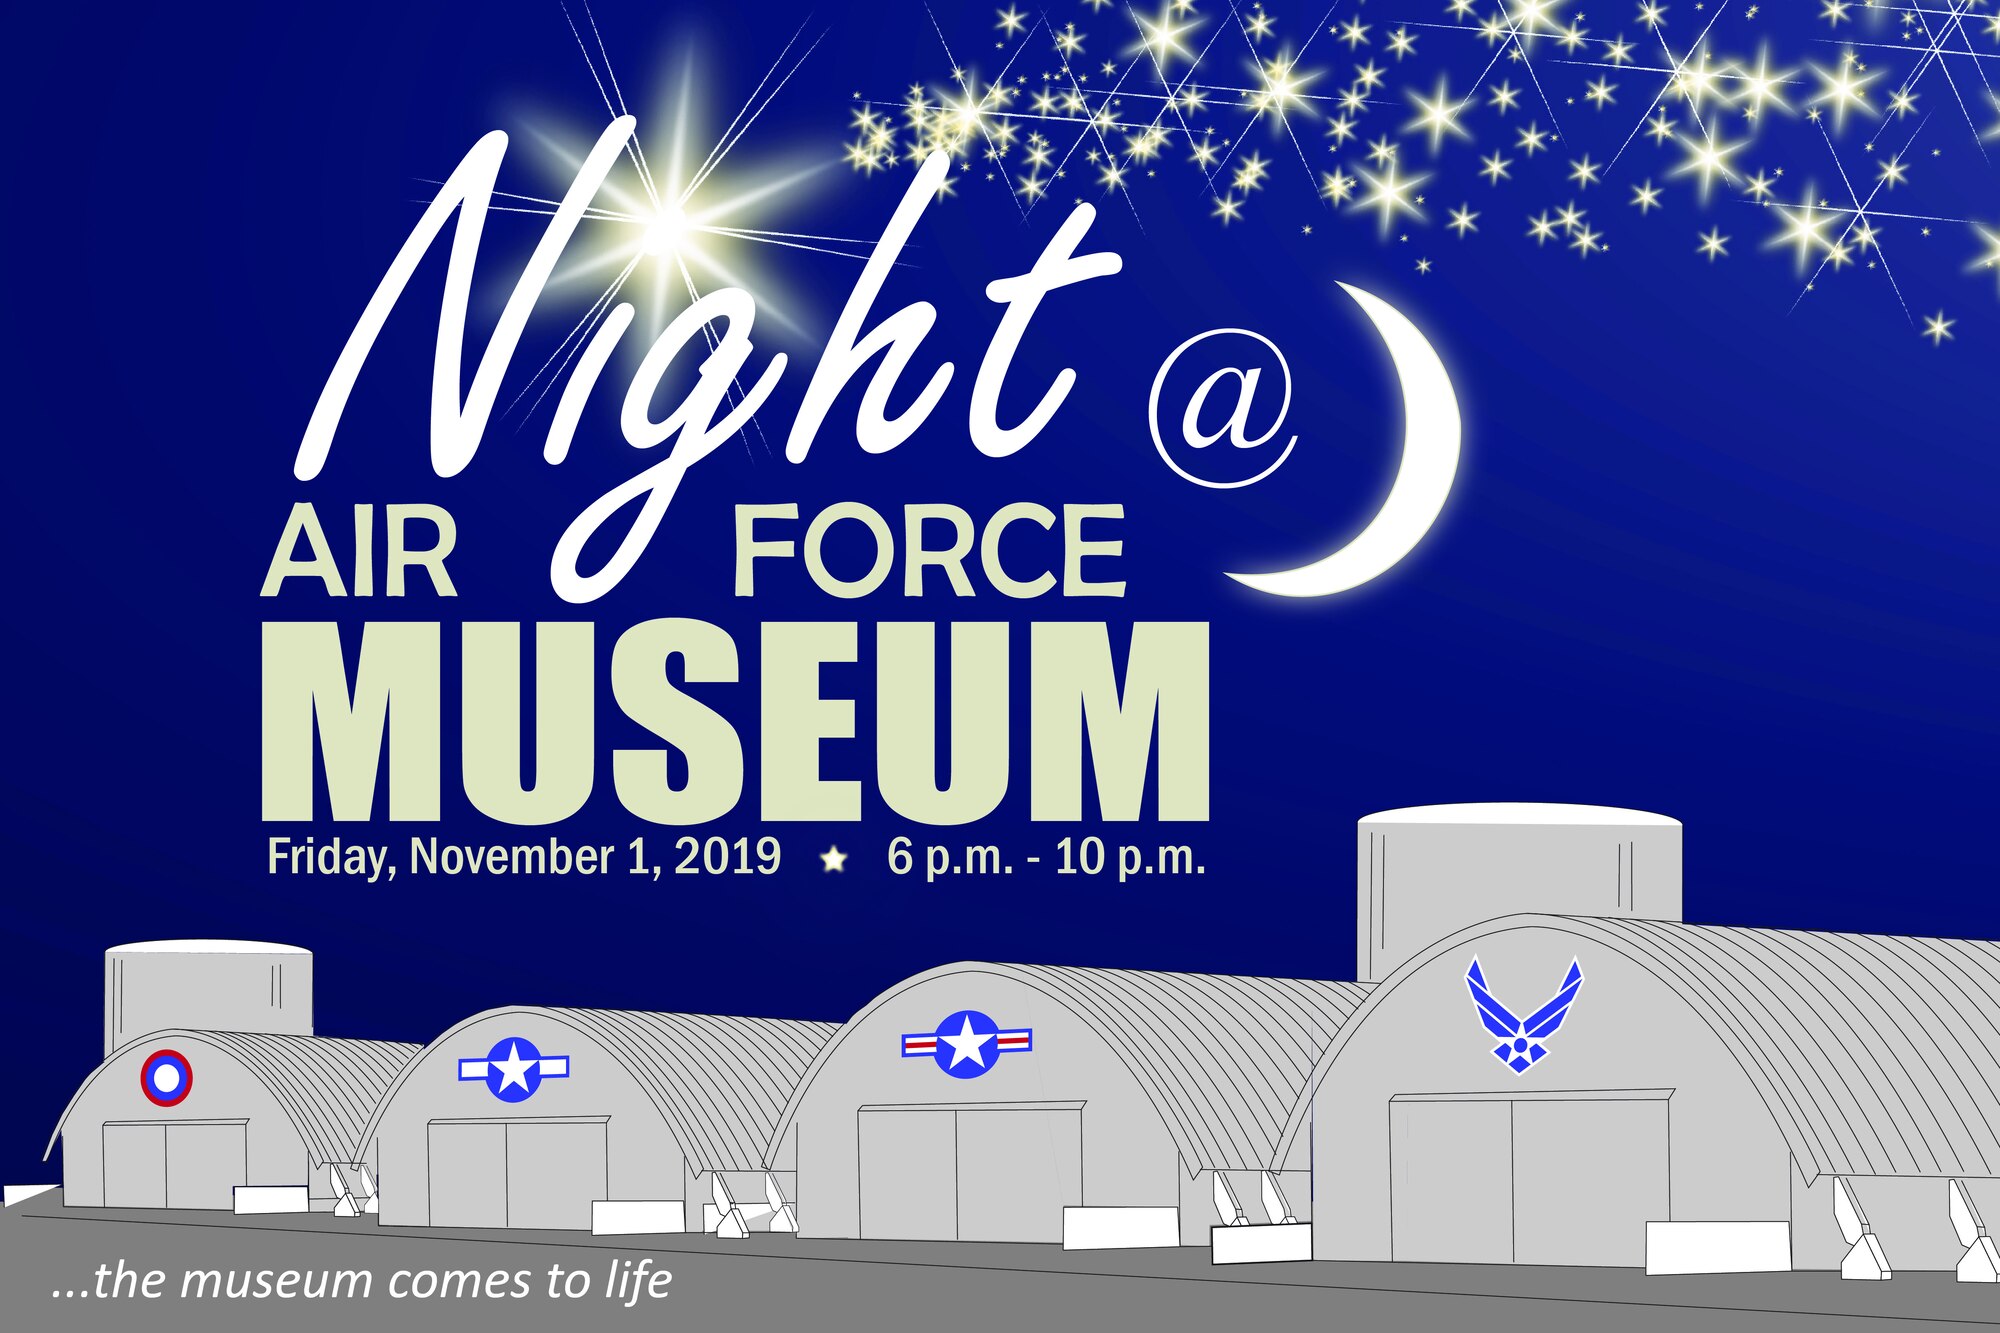 The museum comes to life with a variety of activities on Friday, November 1st, 2019 from 6-10 p.m. Meet historical and fictional aviation characters, look-in cockpits, kids activities and more.